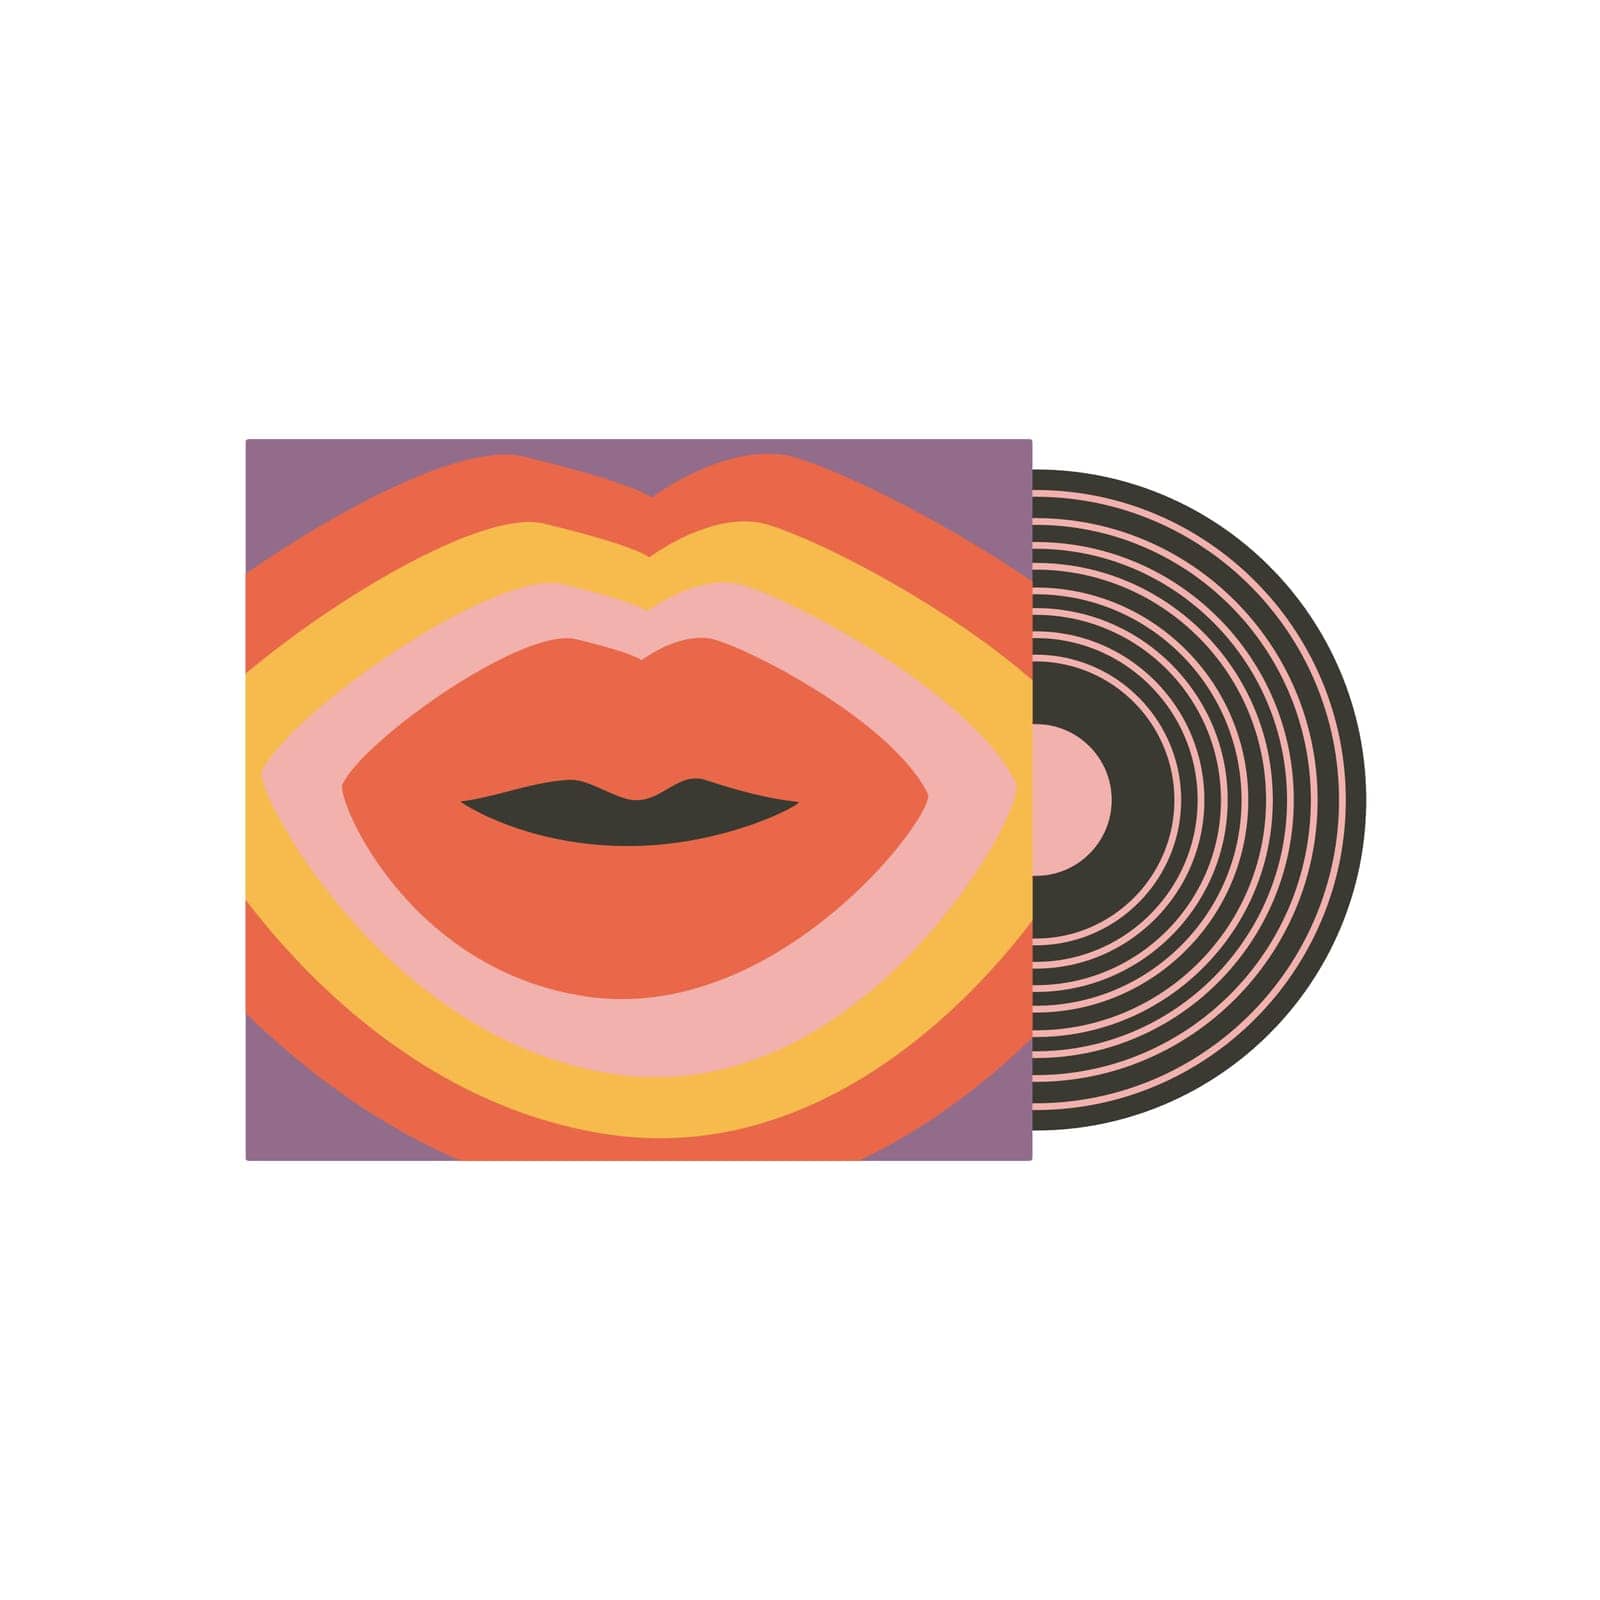 Retro Vinyl Record packed with lips. Vintage Nostalgic 70s-90s vibes for retro sticker, patches and badges. Isolated vector element